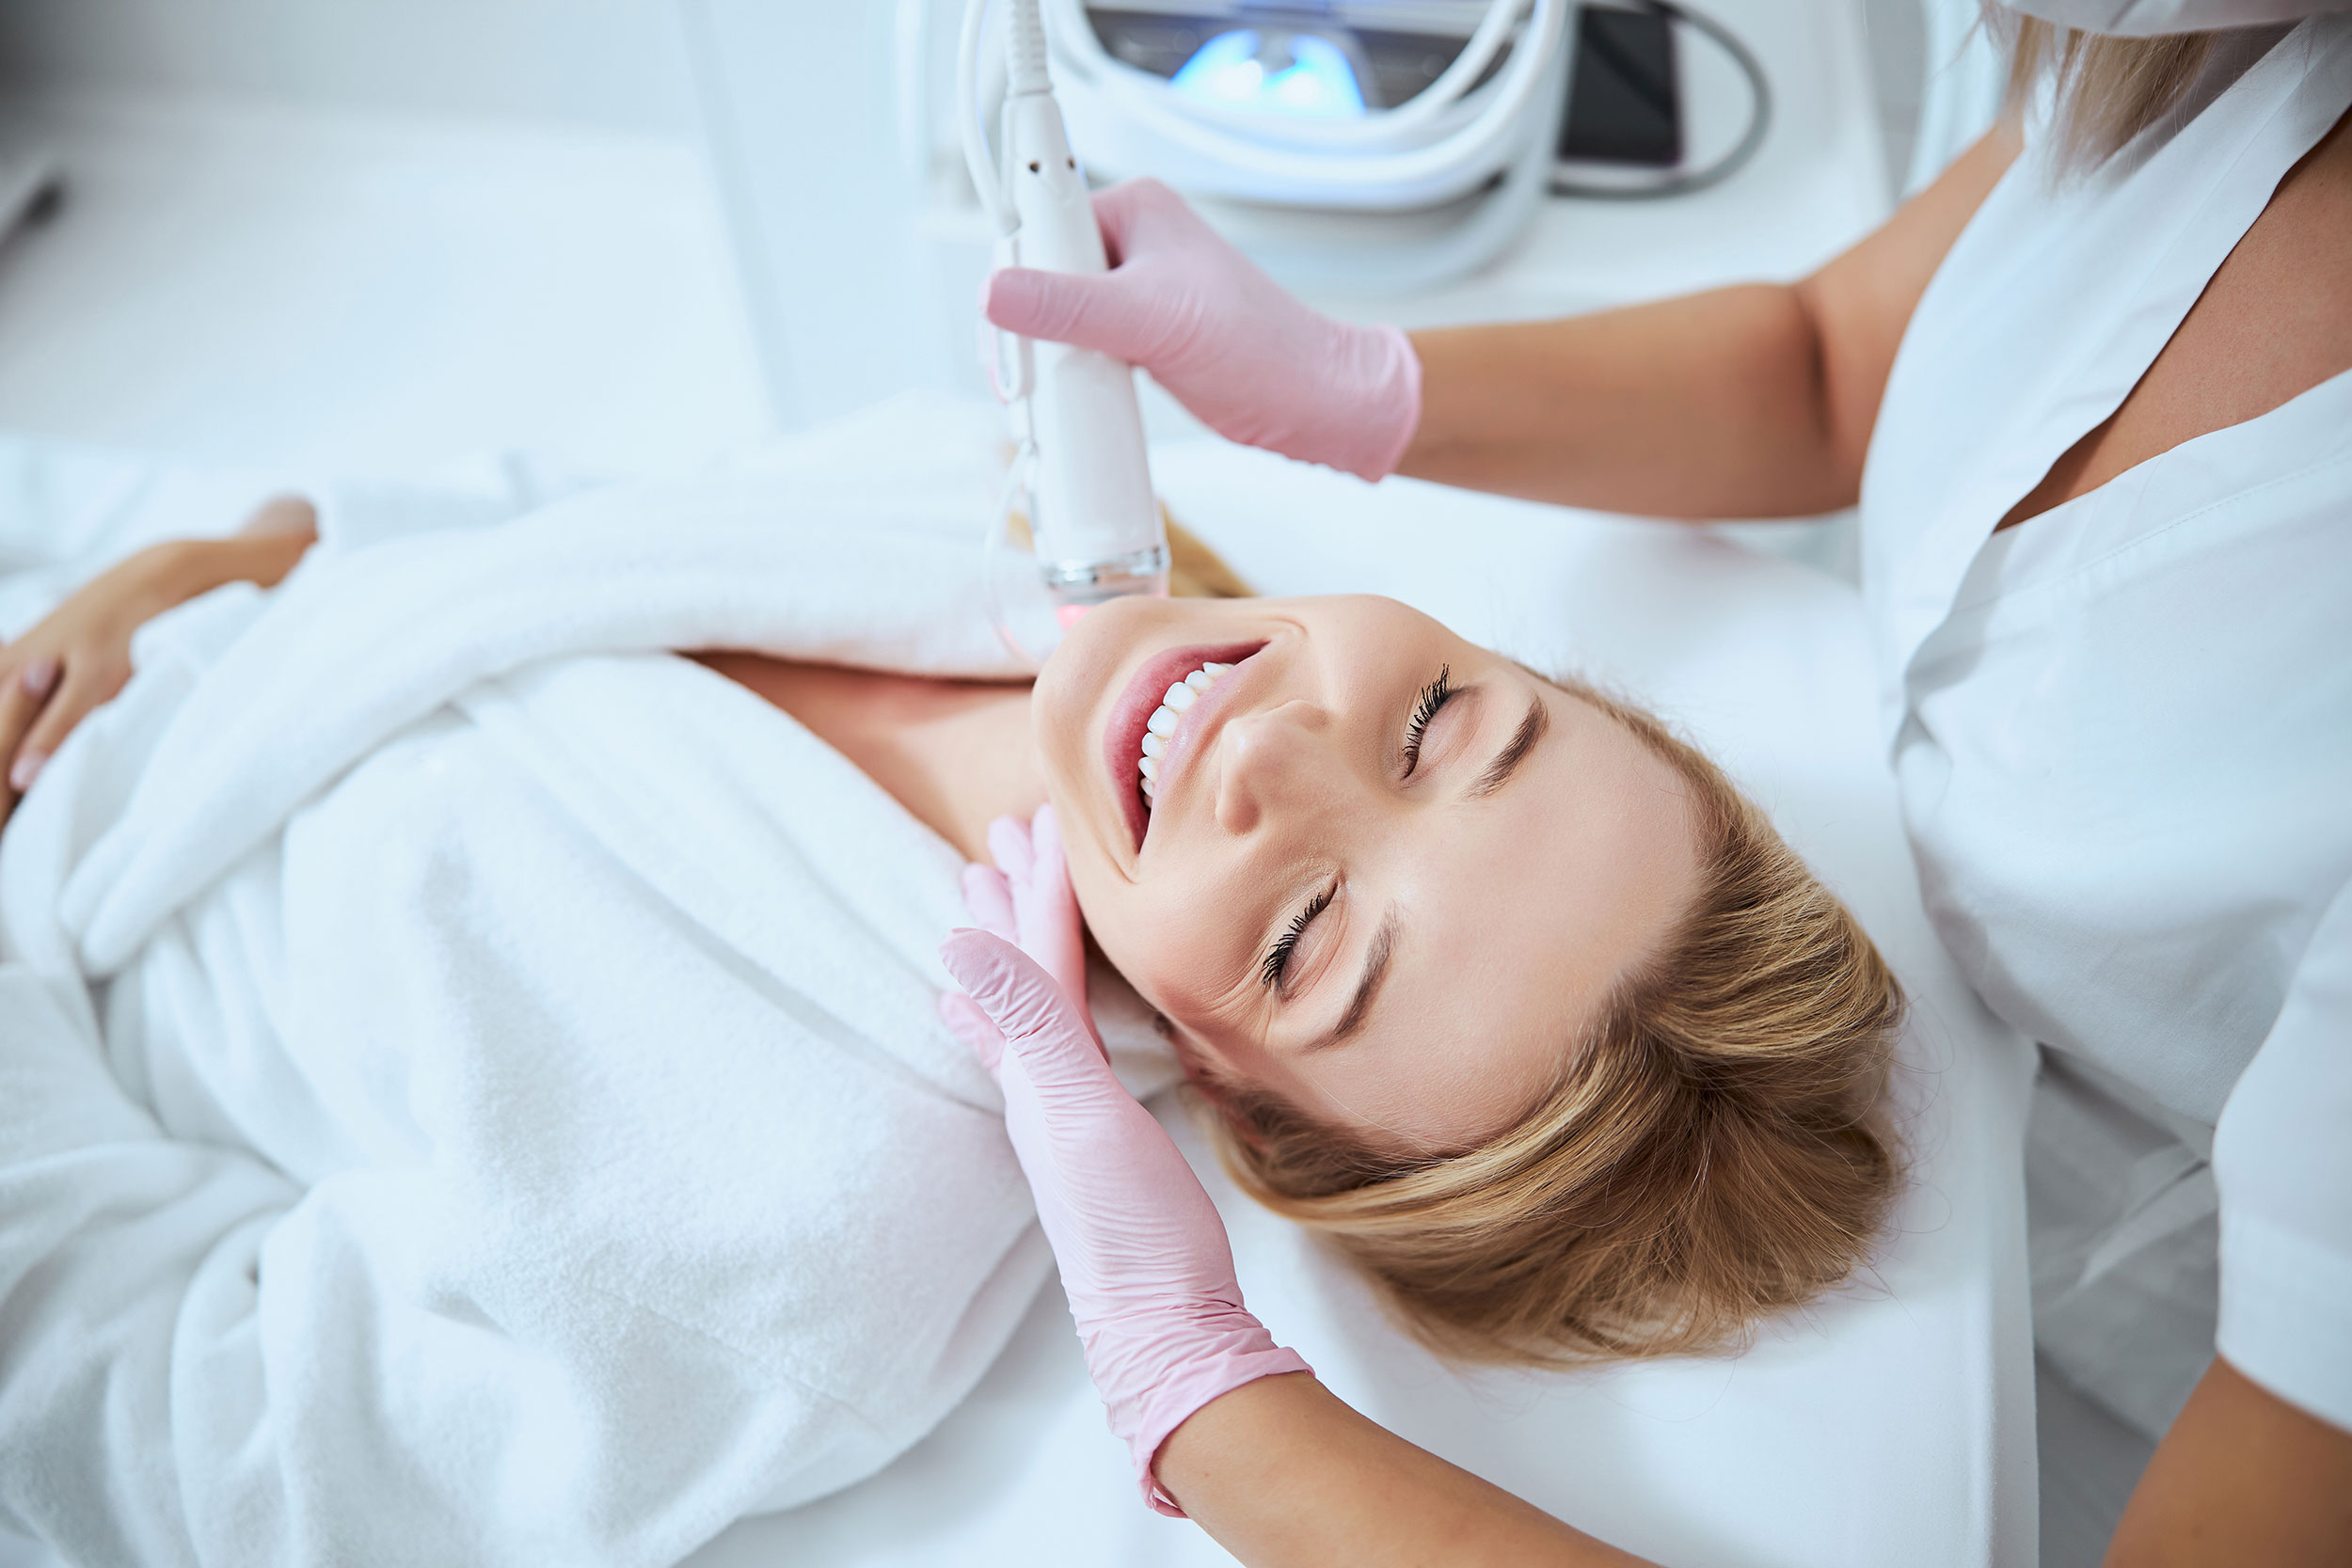 We offer Secret RF, a new microneedling treatment that improves signs of aging skin, fine lines, wrinkles, and scars with little to no downtime.